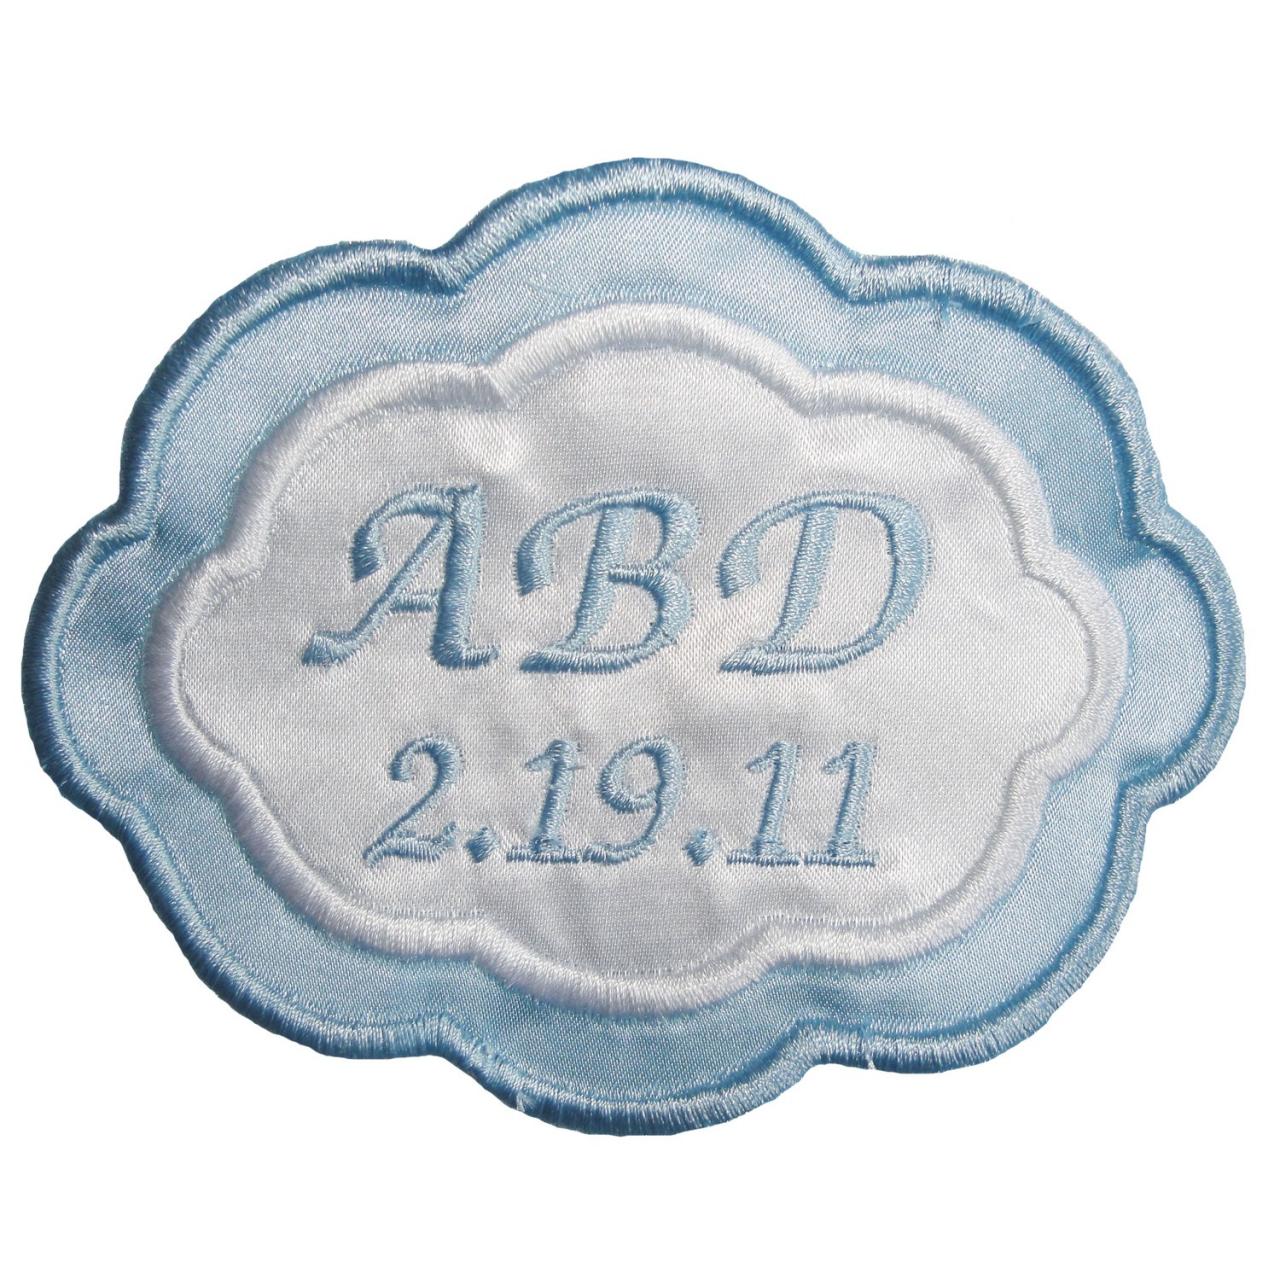 Arielle Embroidered Personalized Wedding Gown Label In Bridal Blue And White